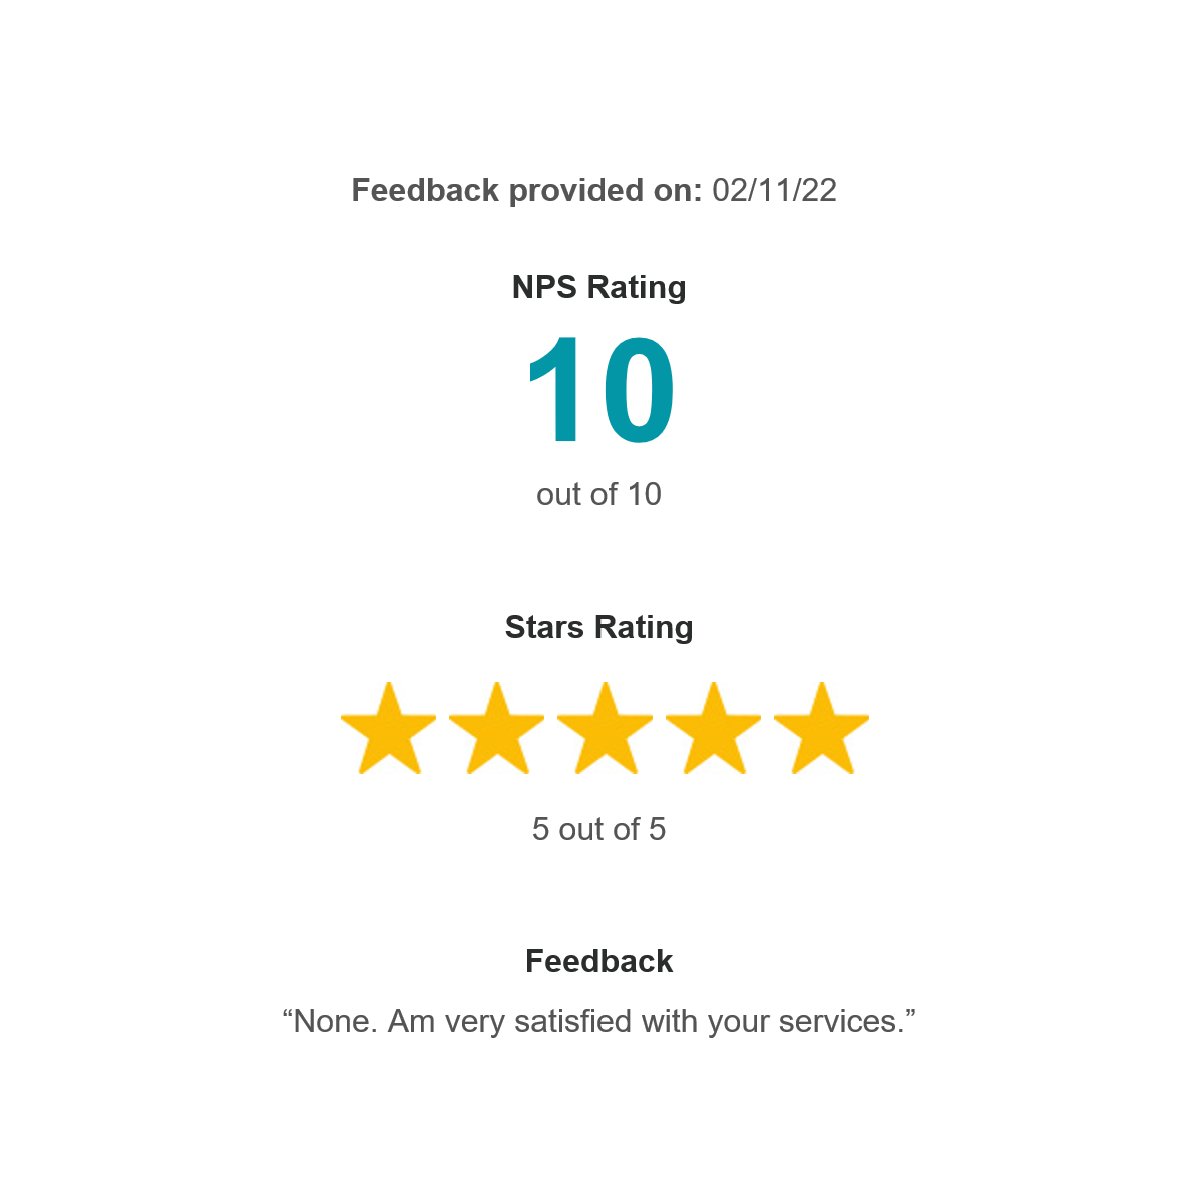 Another 5 Star review - will you be next?

Call for a Free Hair REgrowth Consultation: +1 310 601-4778

For more info visit our website: stopandregrow.com

#hairregrowth#regrowhair#hairlosssolution #hairlosshelp#stophairloss#hairlossscure#HairlossAuthority #stopandregrow